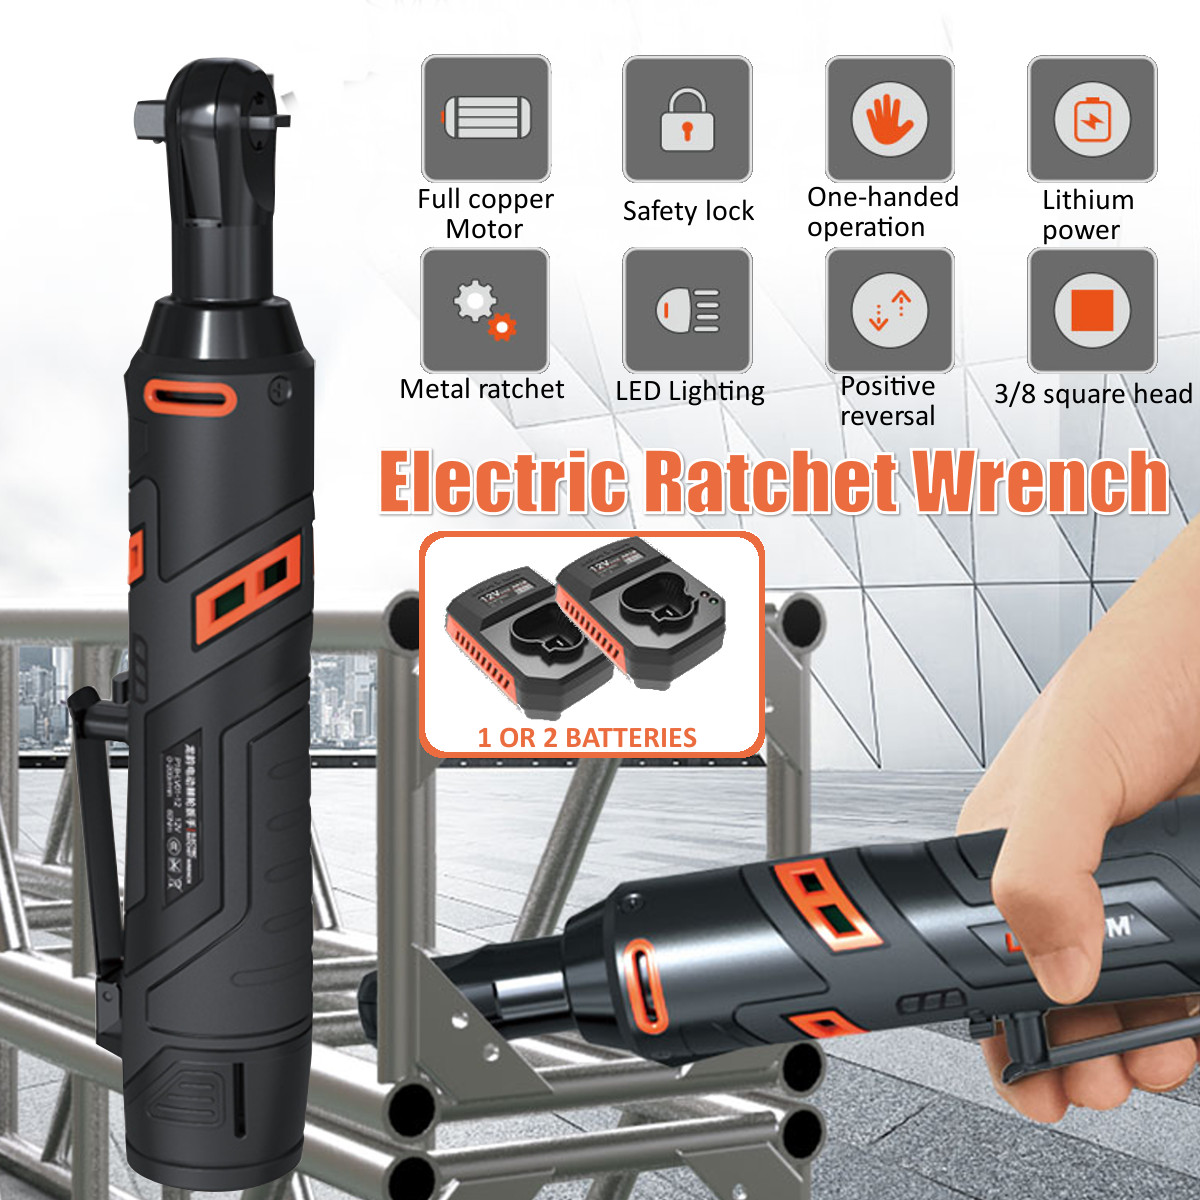 60NM-12V-Electric-Rechargeable-Truss-Ratchet-Wrench-90deg-Right-Angle-Electric-Wrench-Large-Torque-C-1625446-3